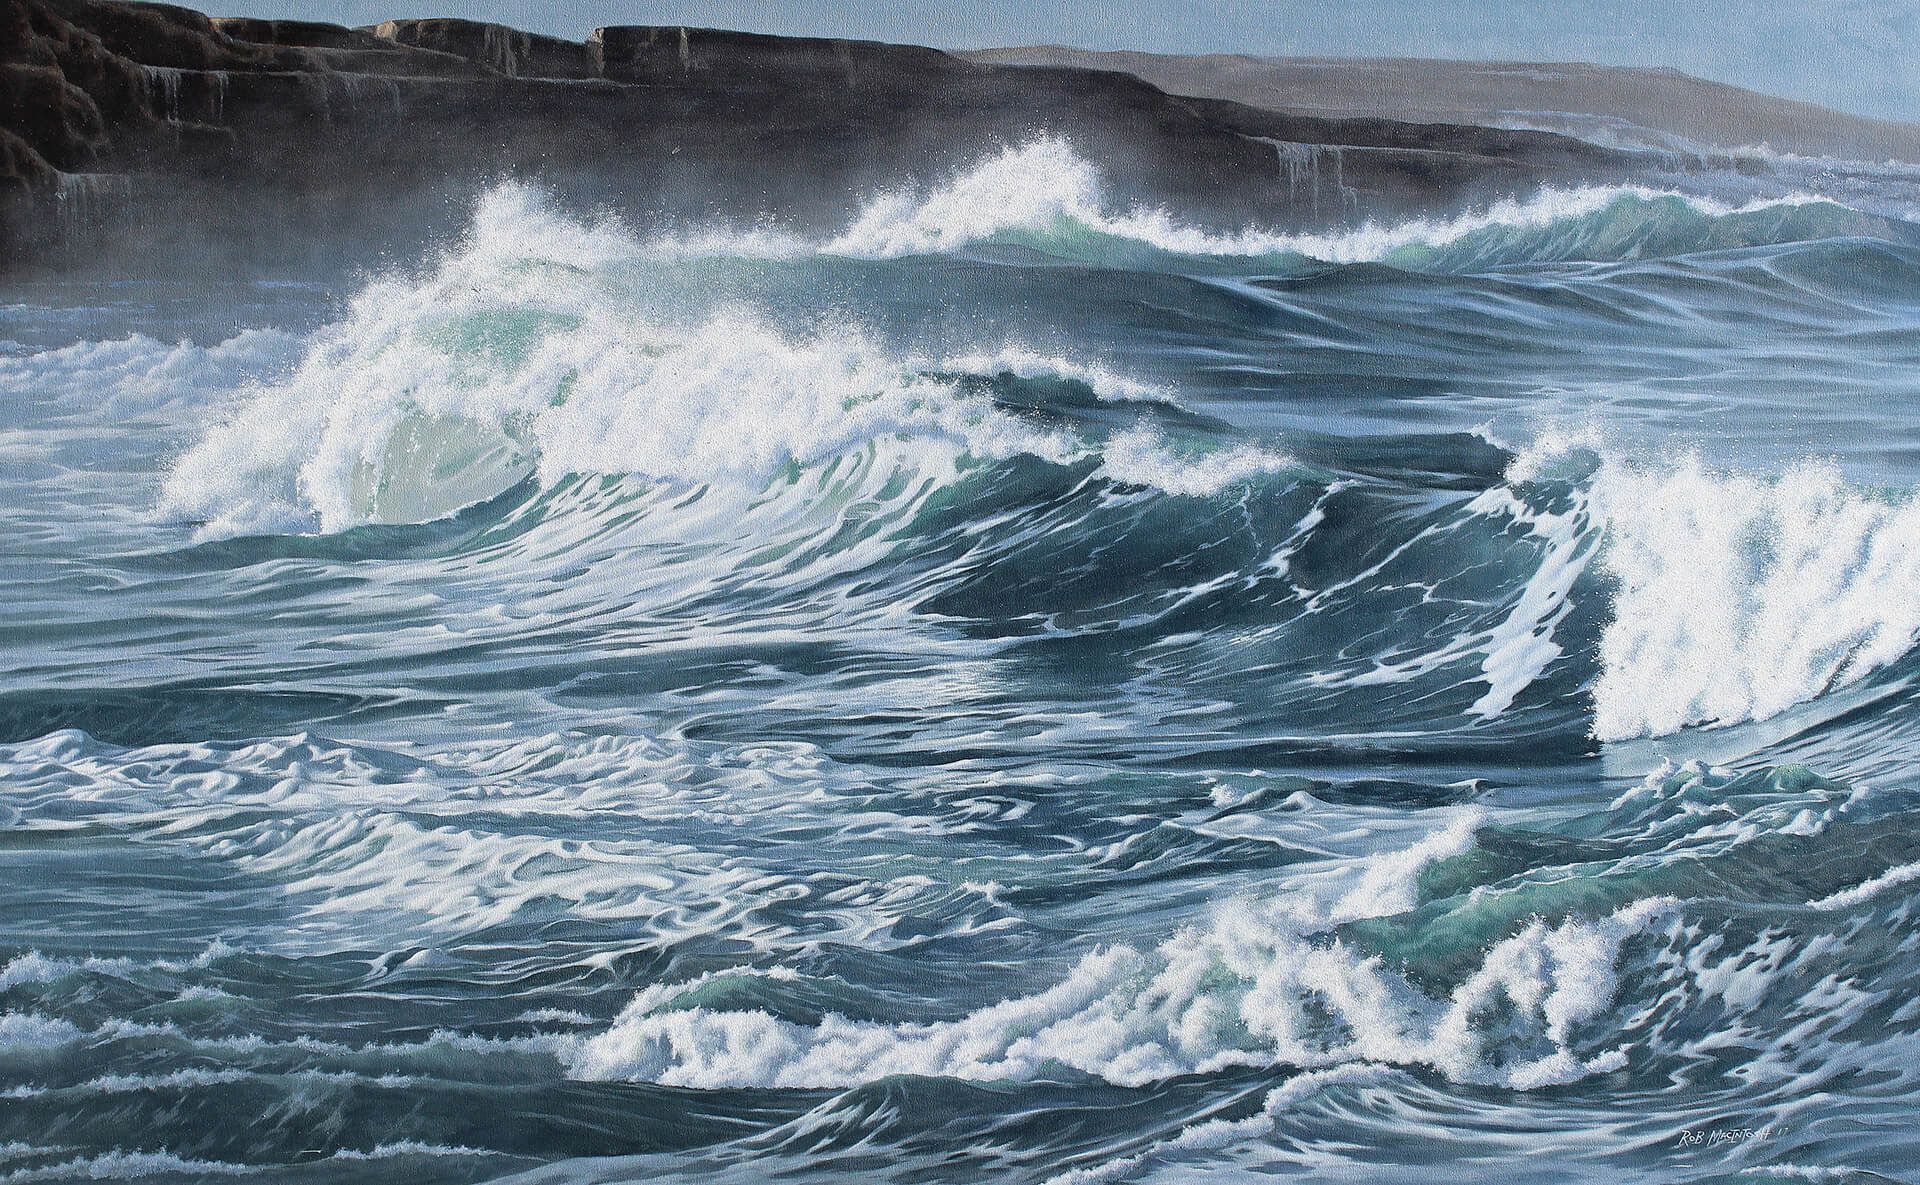 Photorealistic painting of waves breaking near the shore of a beach